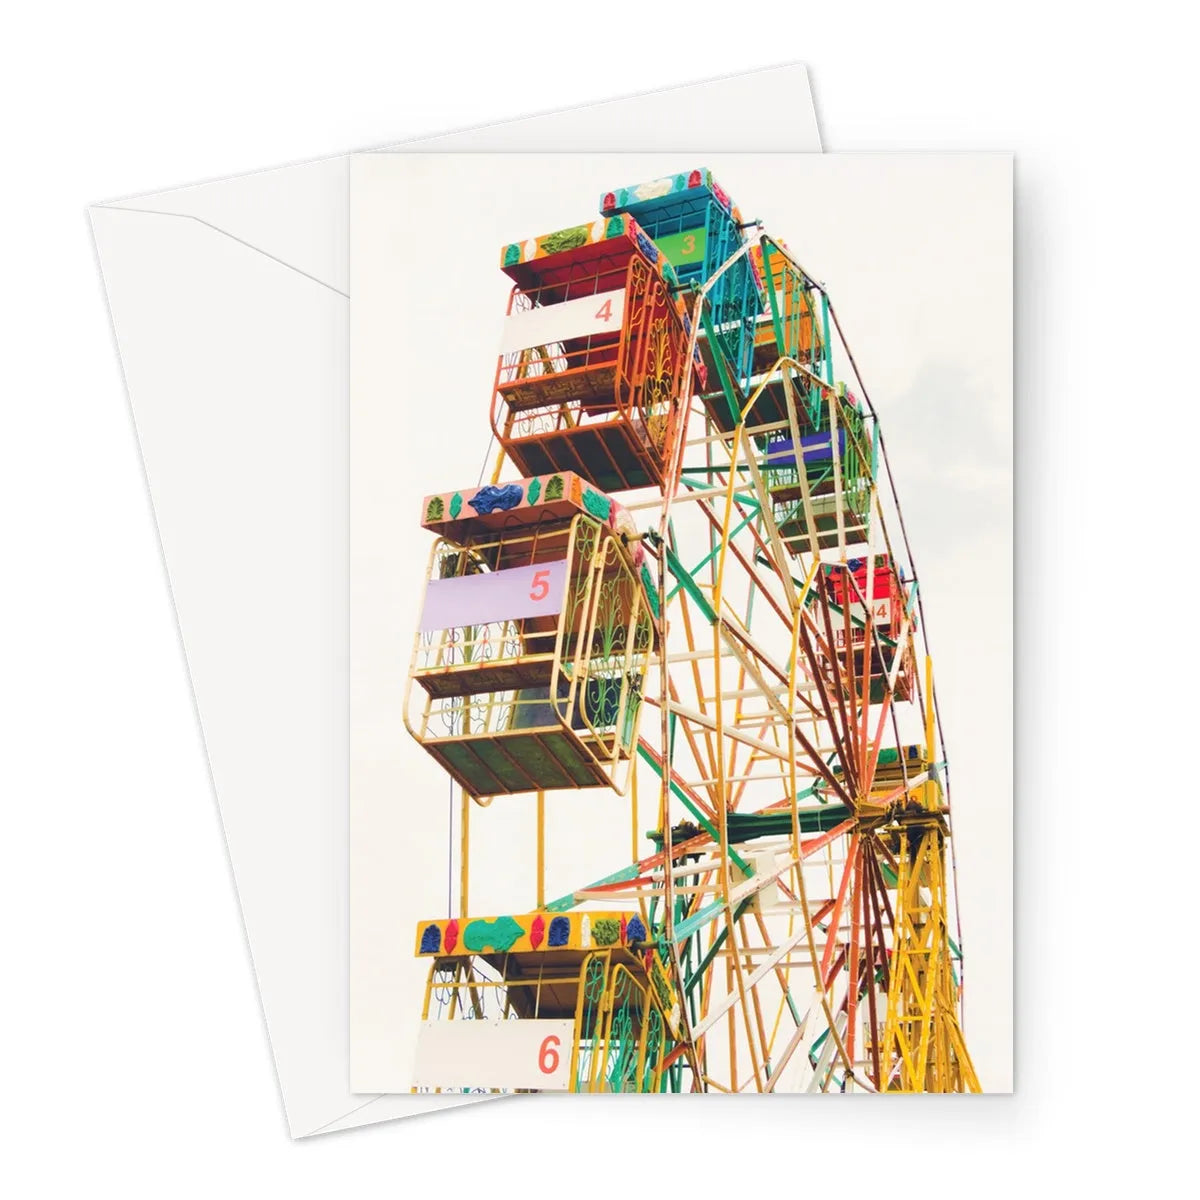 Wheel Of Fortune Greeting Card - A5 Portrait / 10 Cards - Greeting & Note Cards - Aesthetic Art